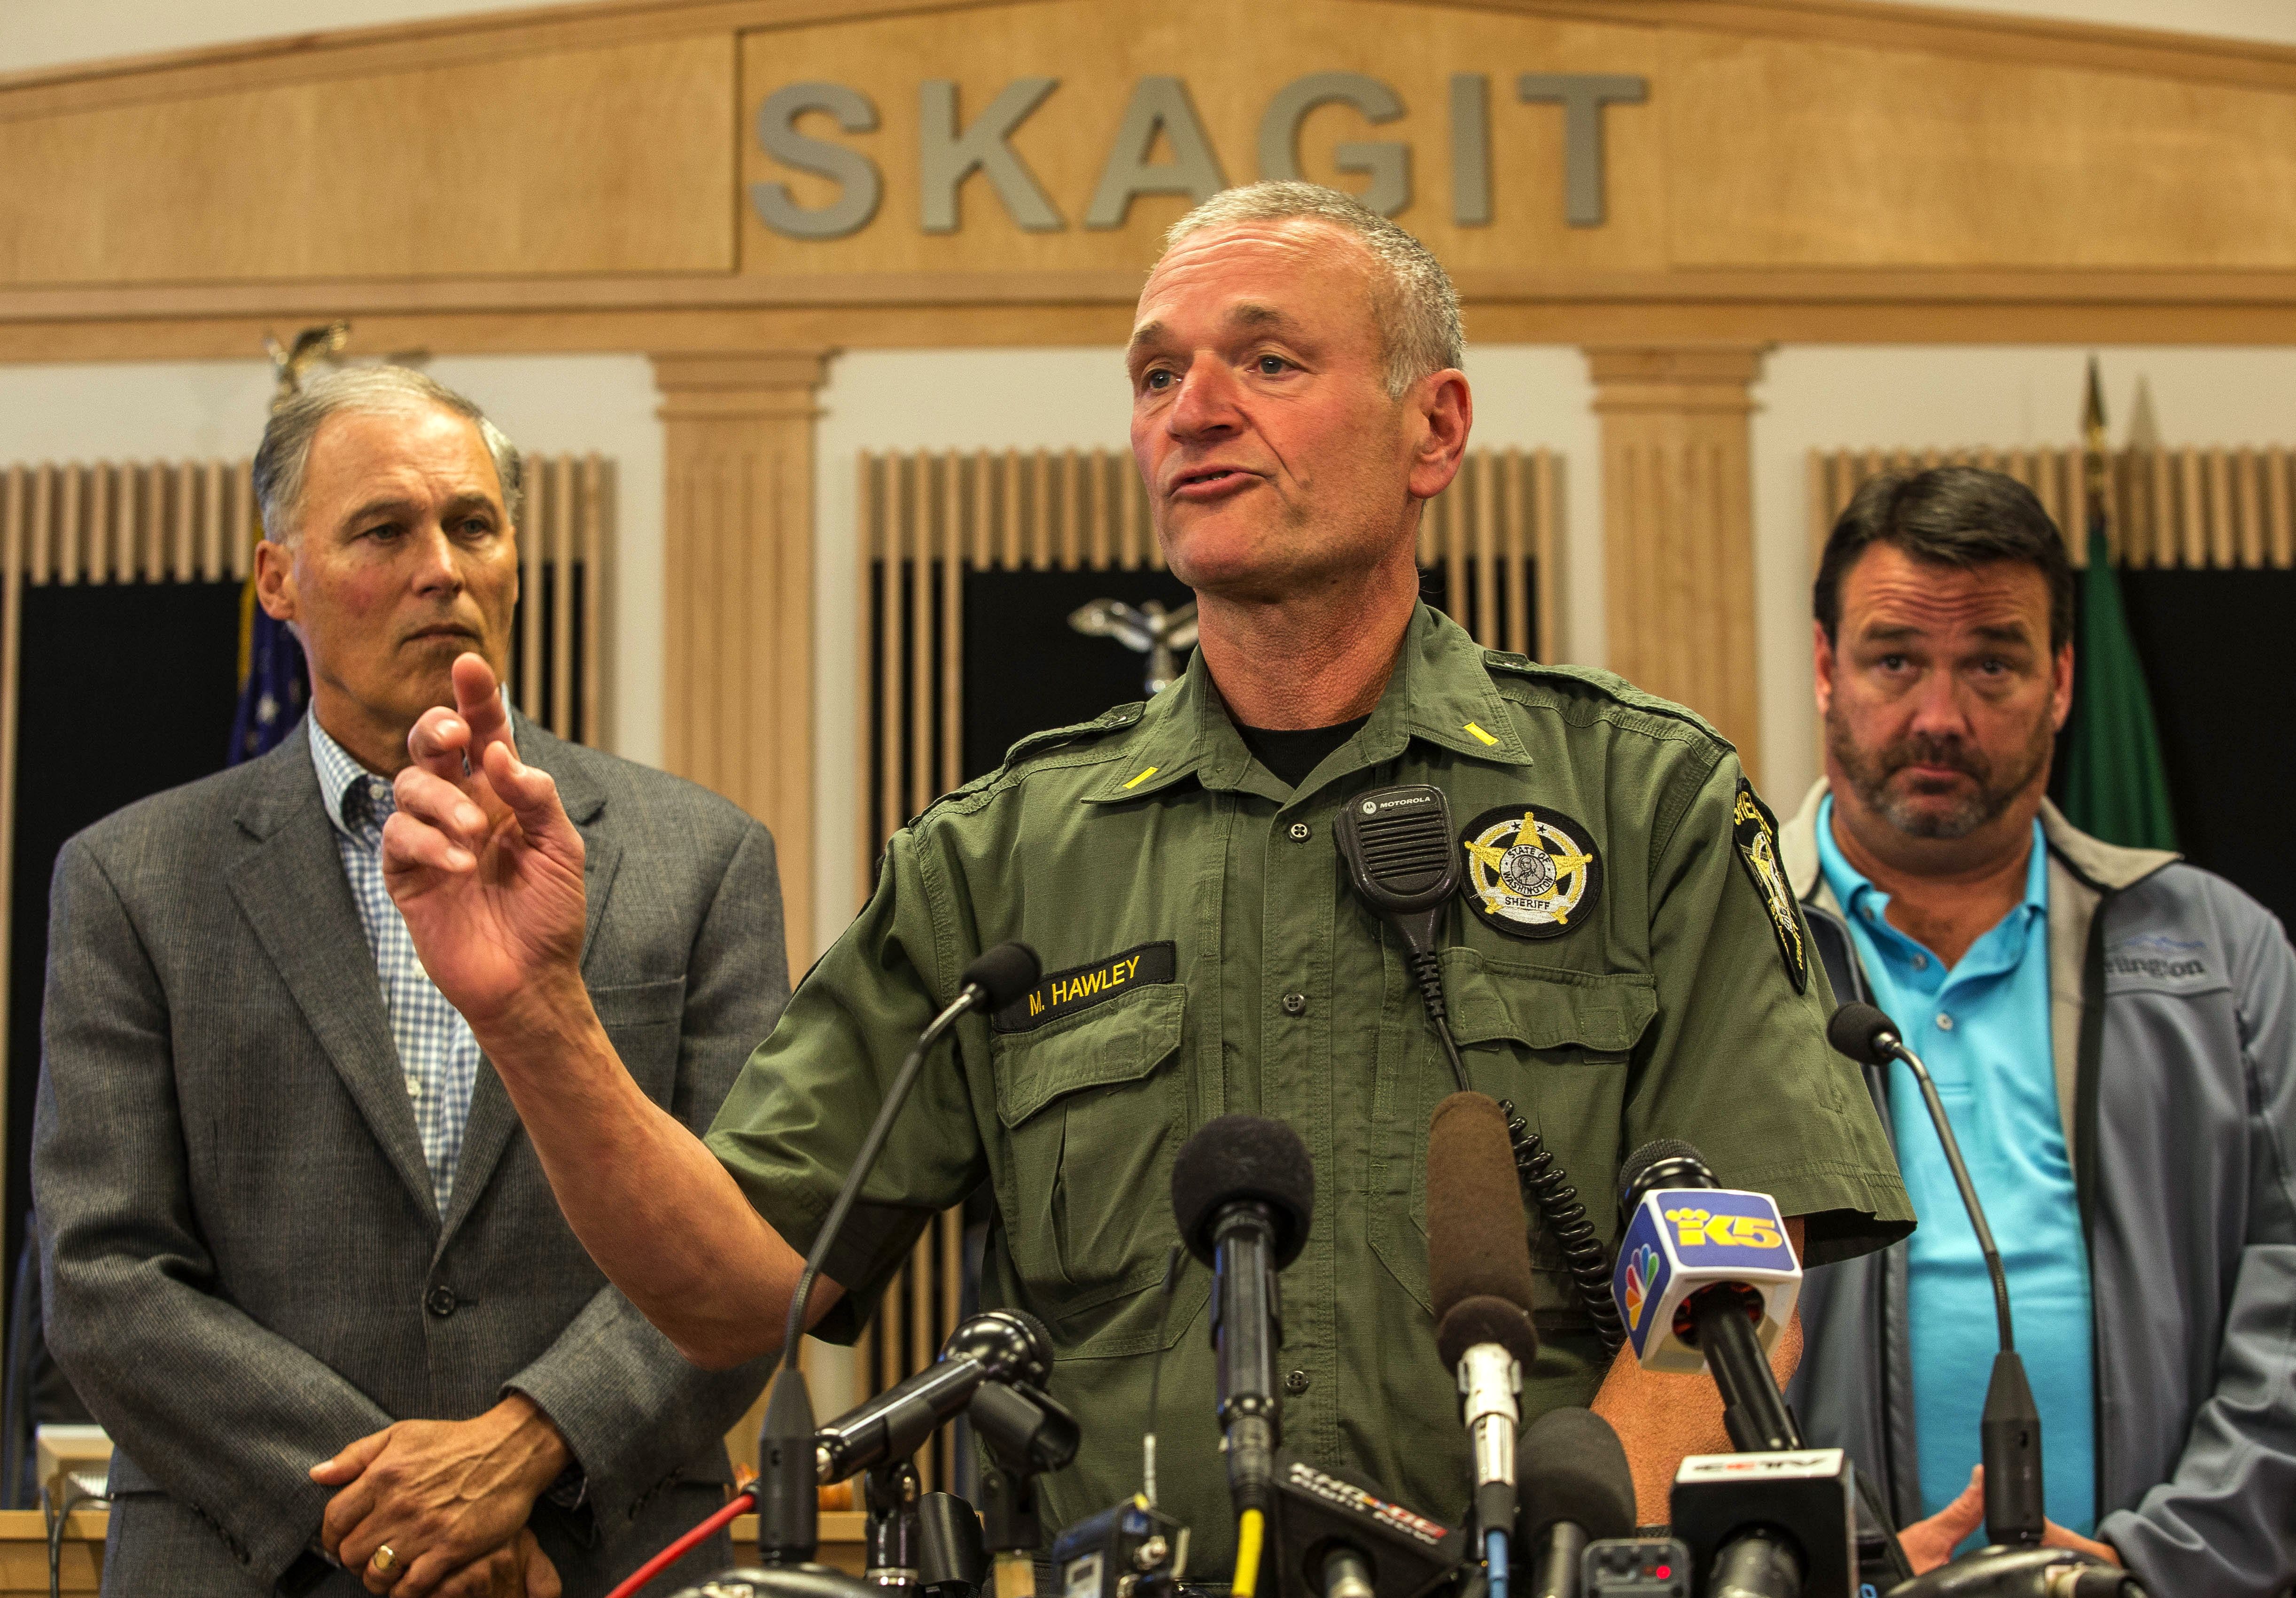 Lt. Mike Hawley with Island County Sheriff's office discusses the capture of Arcan Cetin, 20, who was wanted in connection with Friday's mass shooting at Cascade Mall in Burlington on Friday.  Officials, including Washington Gov. Jay Inslee, left, gathered Saturday in the Skagit County chambers in Mt. Vernon.